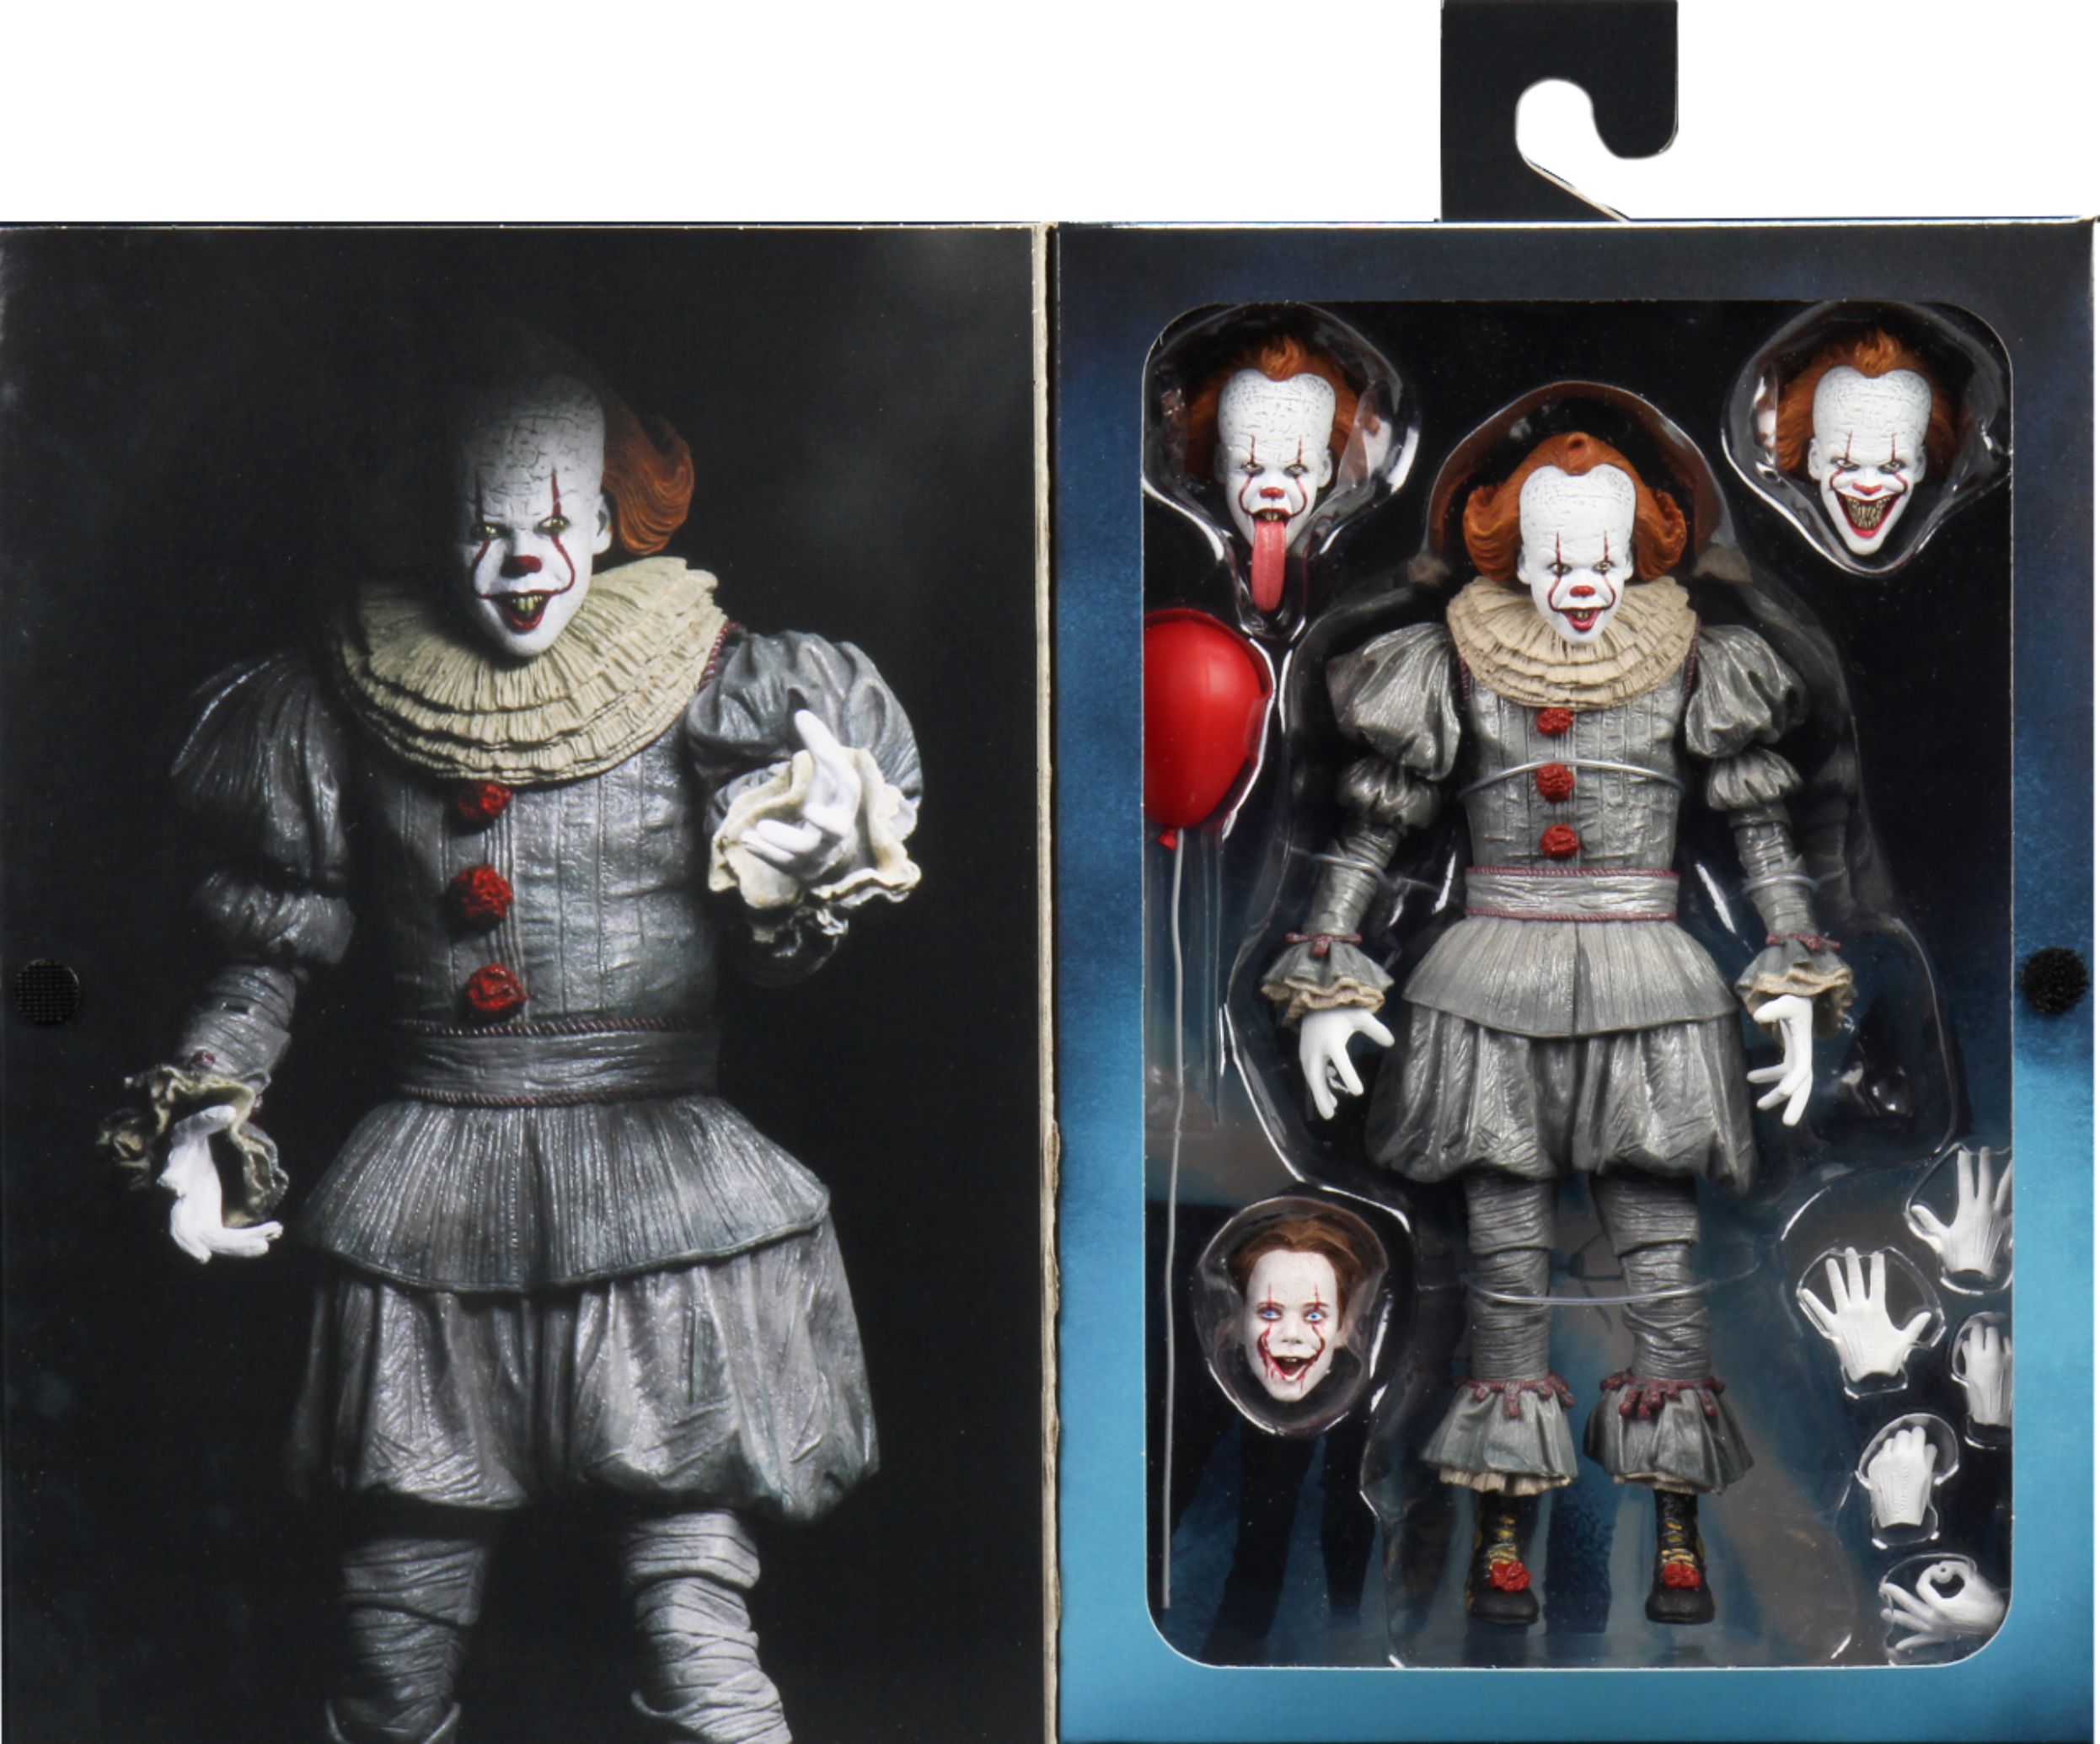 NECA REEL TOYS IT PENNYWISE FIGURE BRAND NEW! 